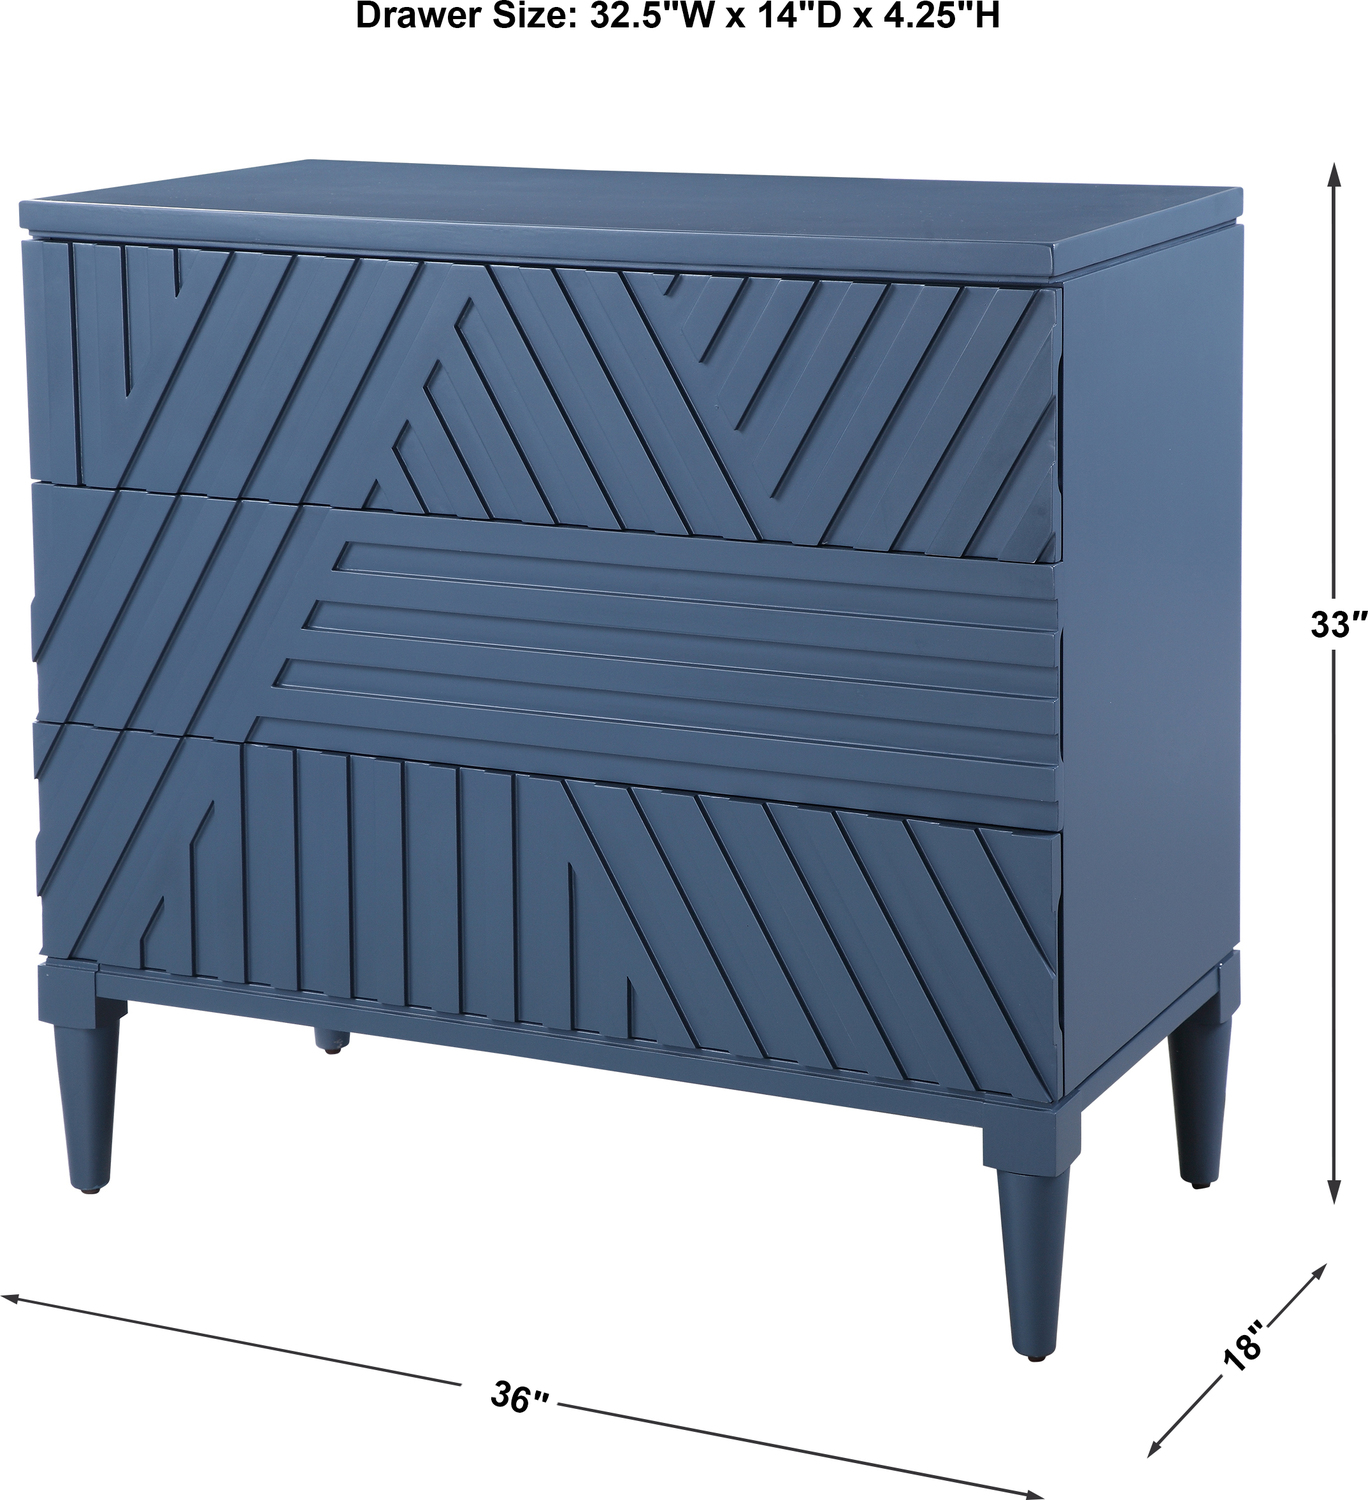 2 door storage cabinet Uttermost Chests & Cabinets Refreshingly Modern, This Geometric Accent Chest Features Carved Drawer Fronts, Creating A Monochromatic Statement In A Deep Sea Blue Finish.